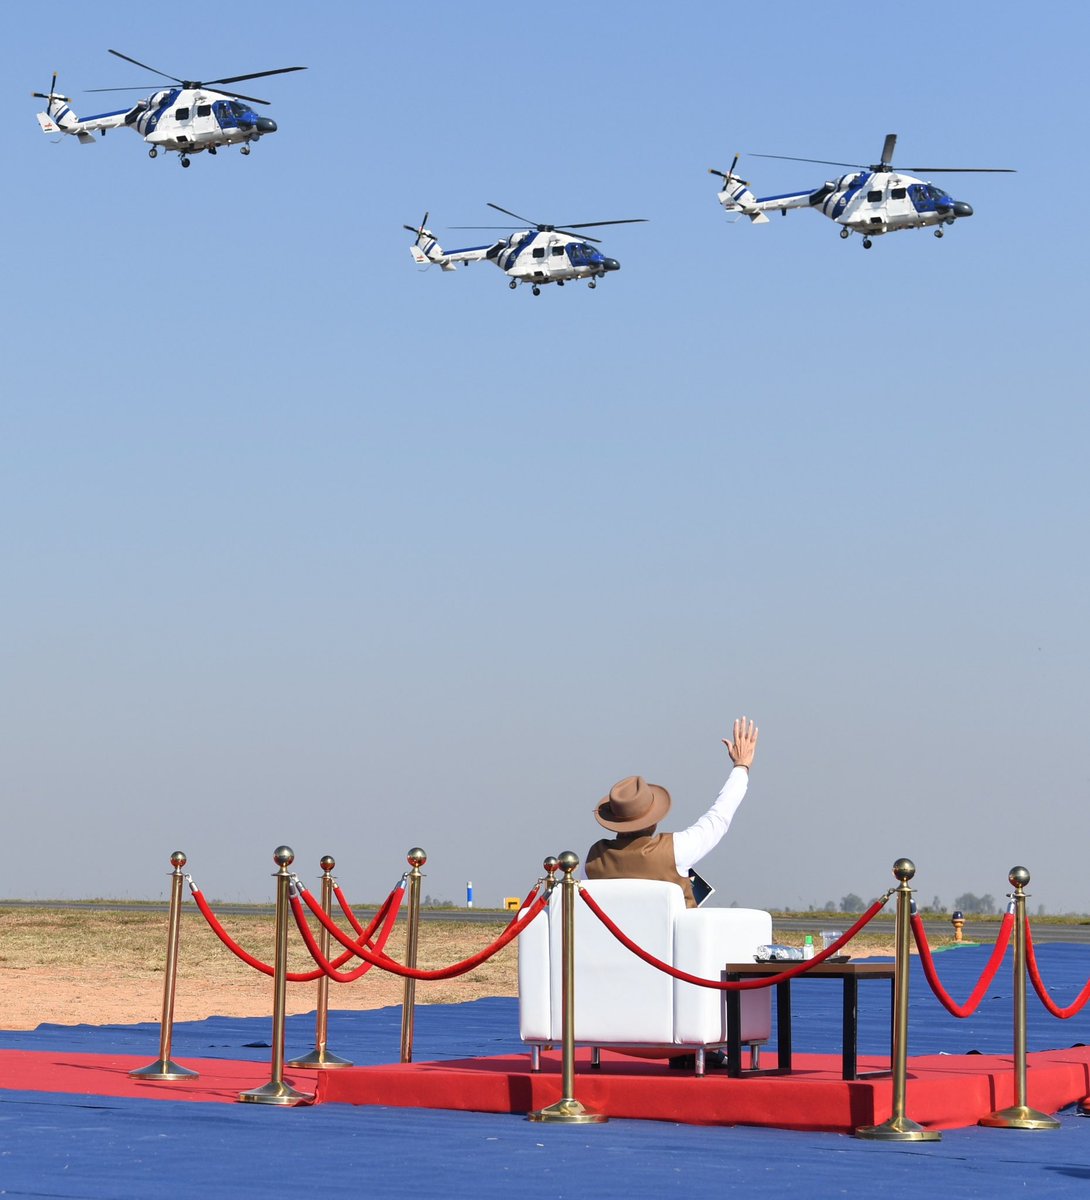 Picture of the day ♥
#AeroIndia